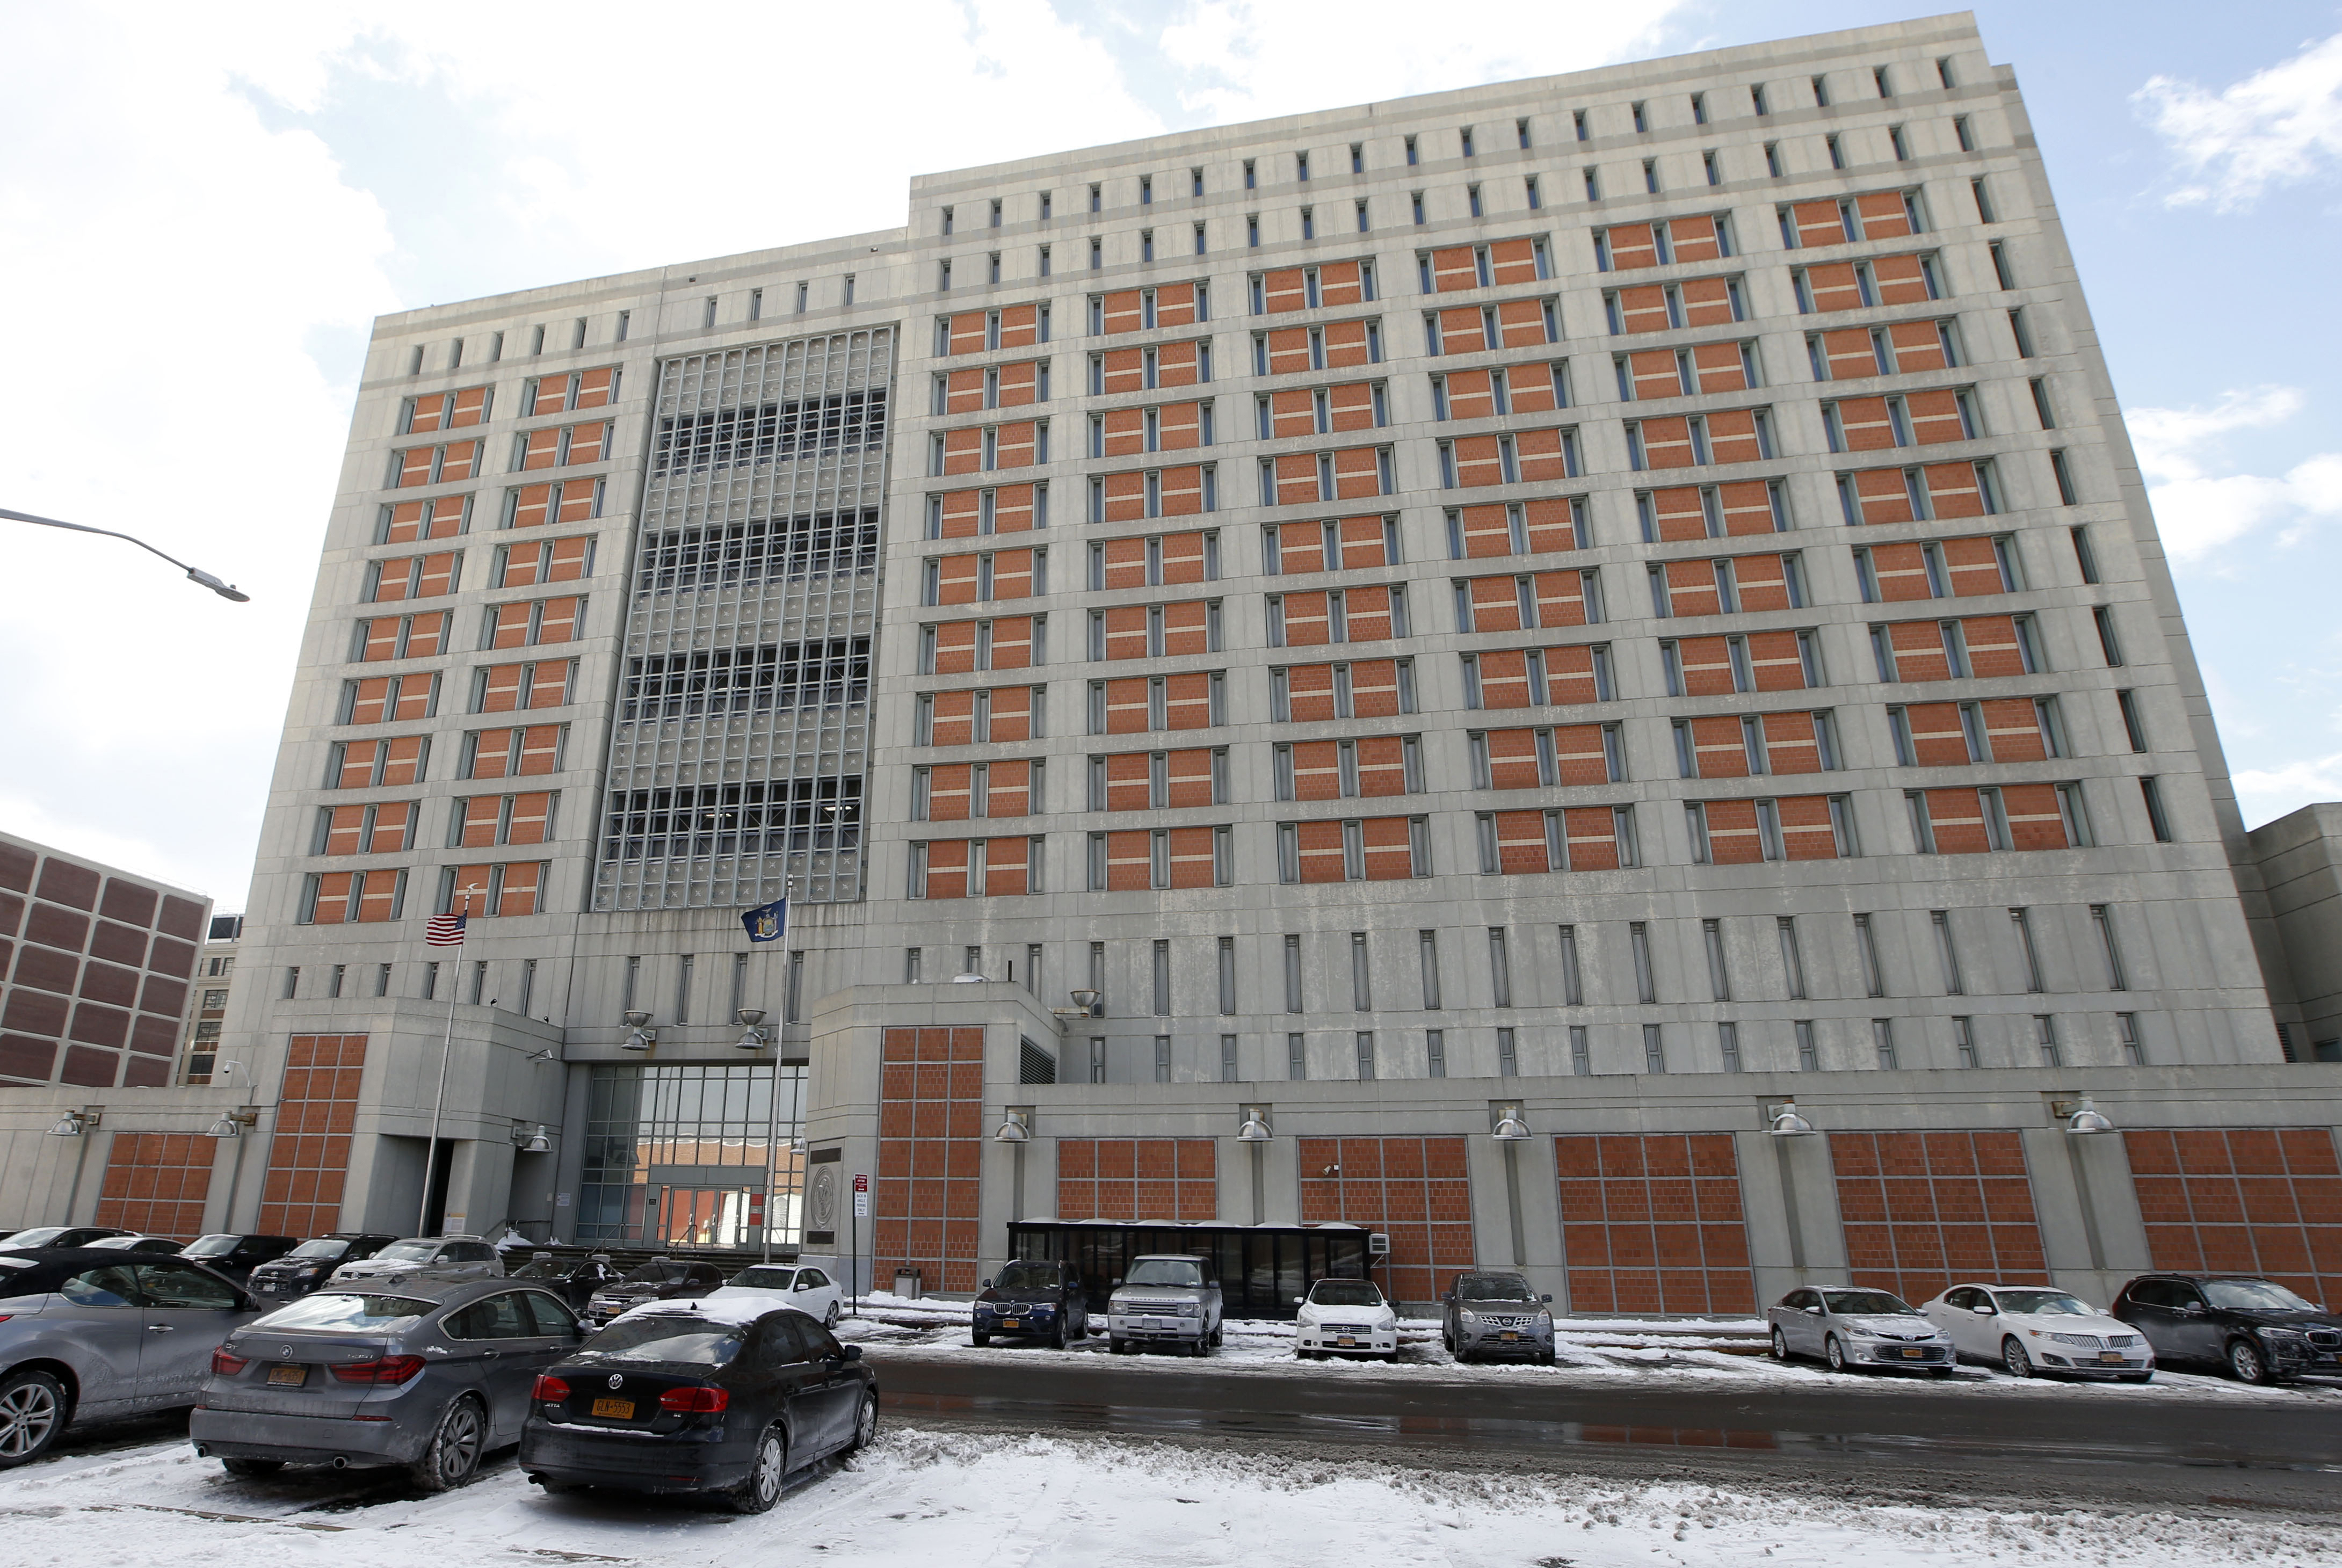 This Jan. 8, 2017 file photo shows the Metropolitan Detention Center in the Brooklyn borough of New York. The Federal Bureau of Prisons (BOP) has taken a new step in their attempt to stop the spread of coronavirus in their facilities by confining all inmates in their cells for 14 days.  (Kathy Wiliens — Associated Press)